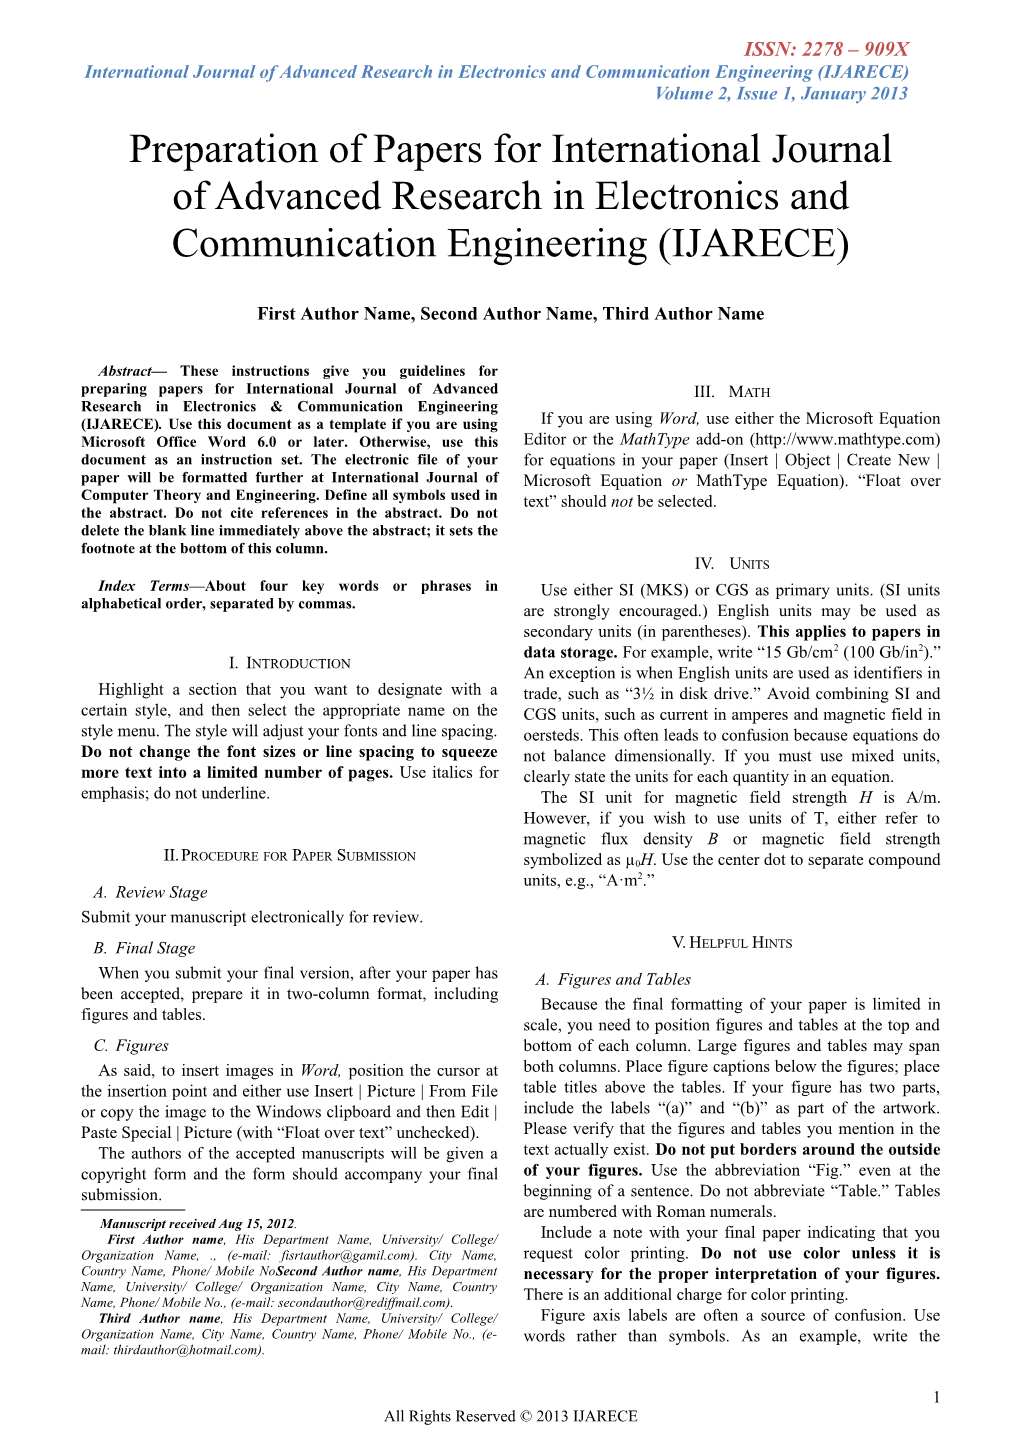 International Journal of Advanced Research in Electronics and Communication Engineering